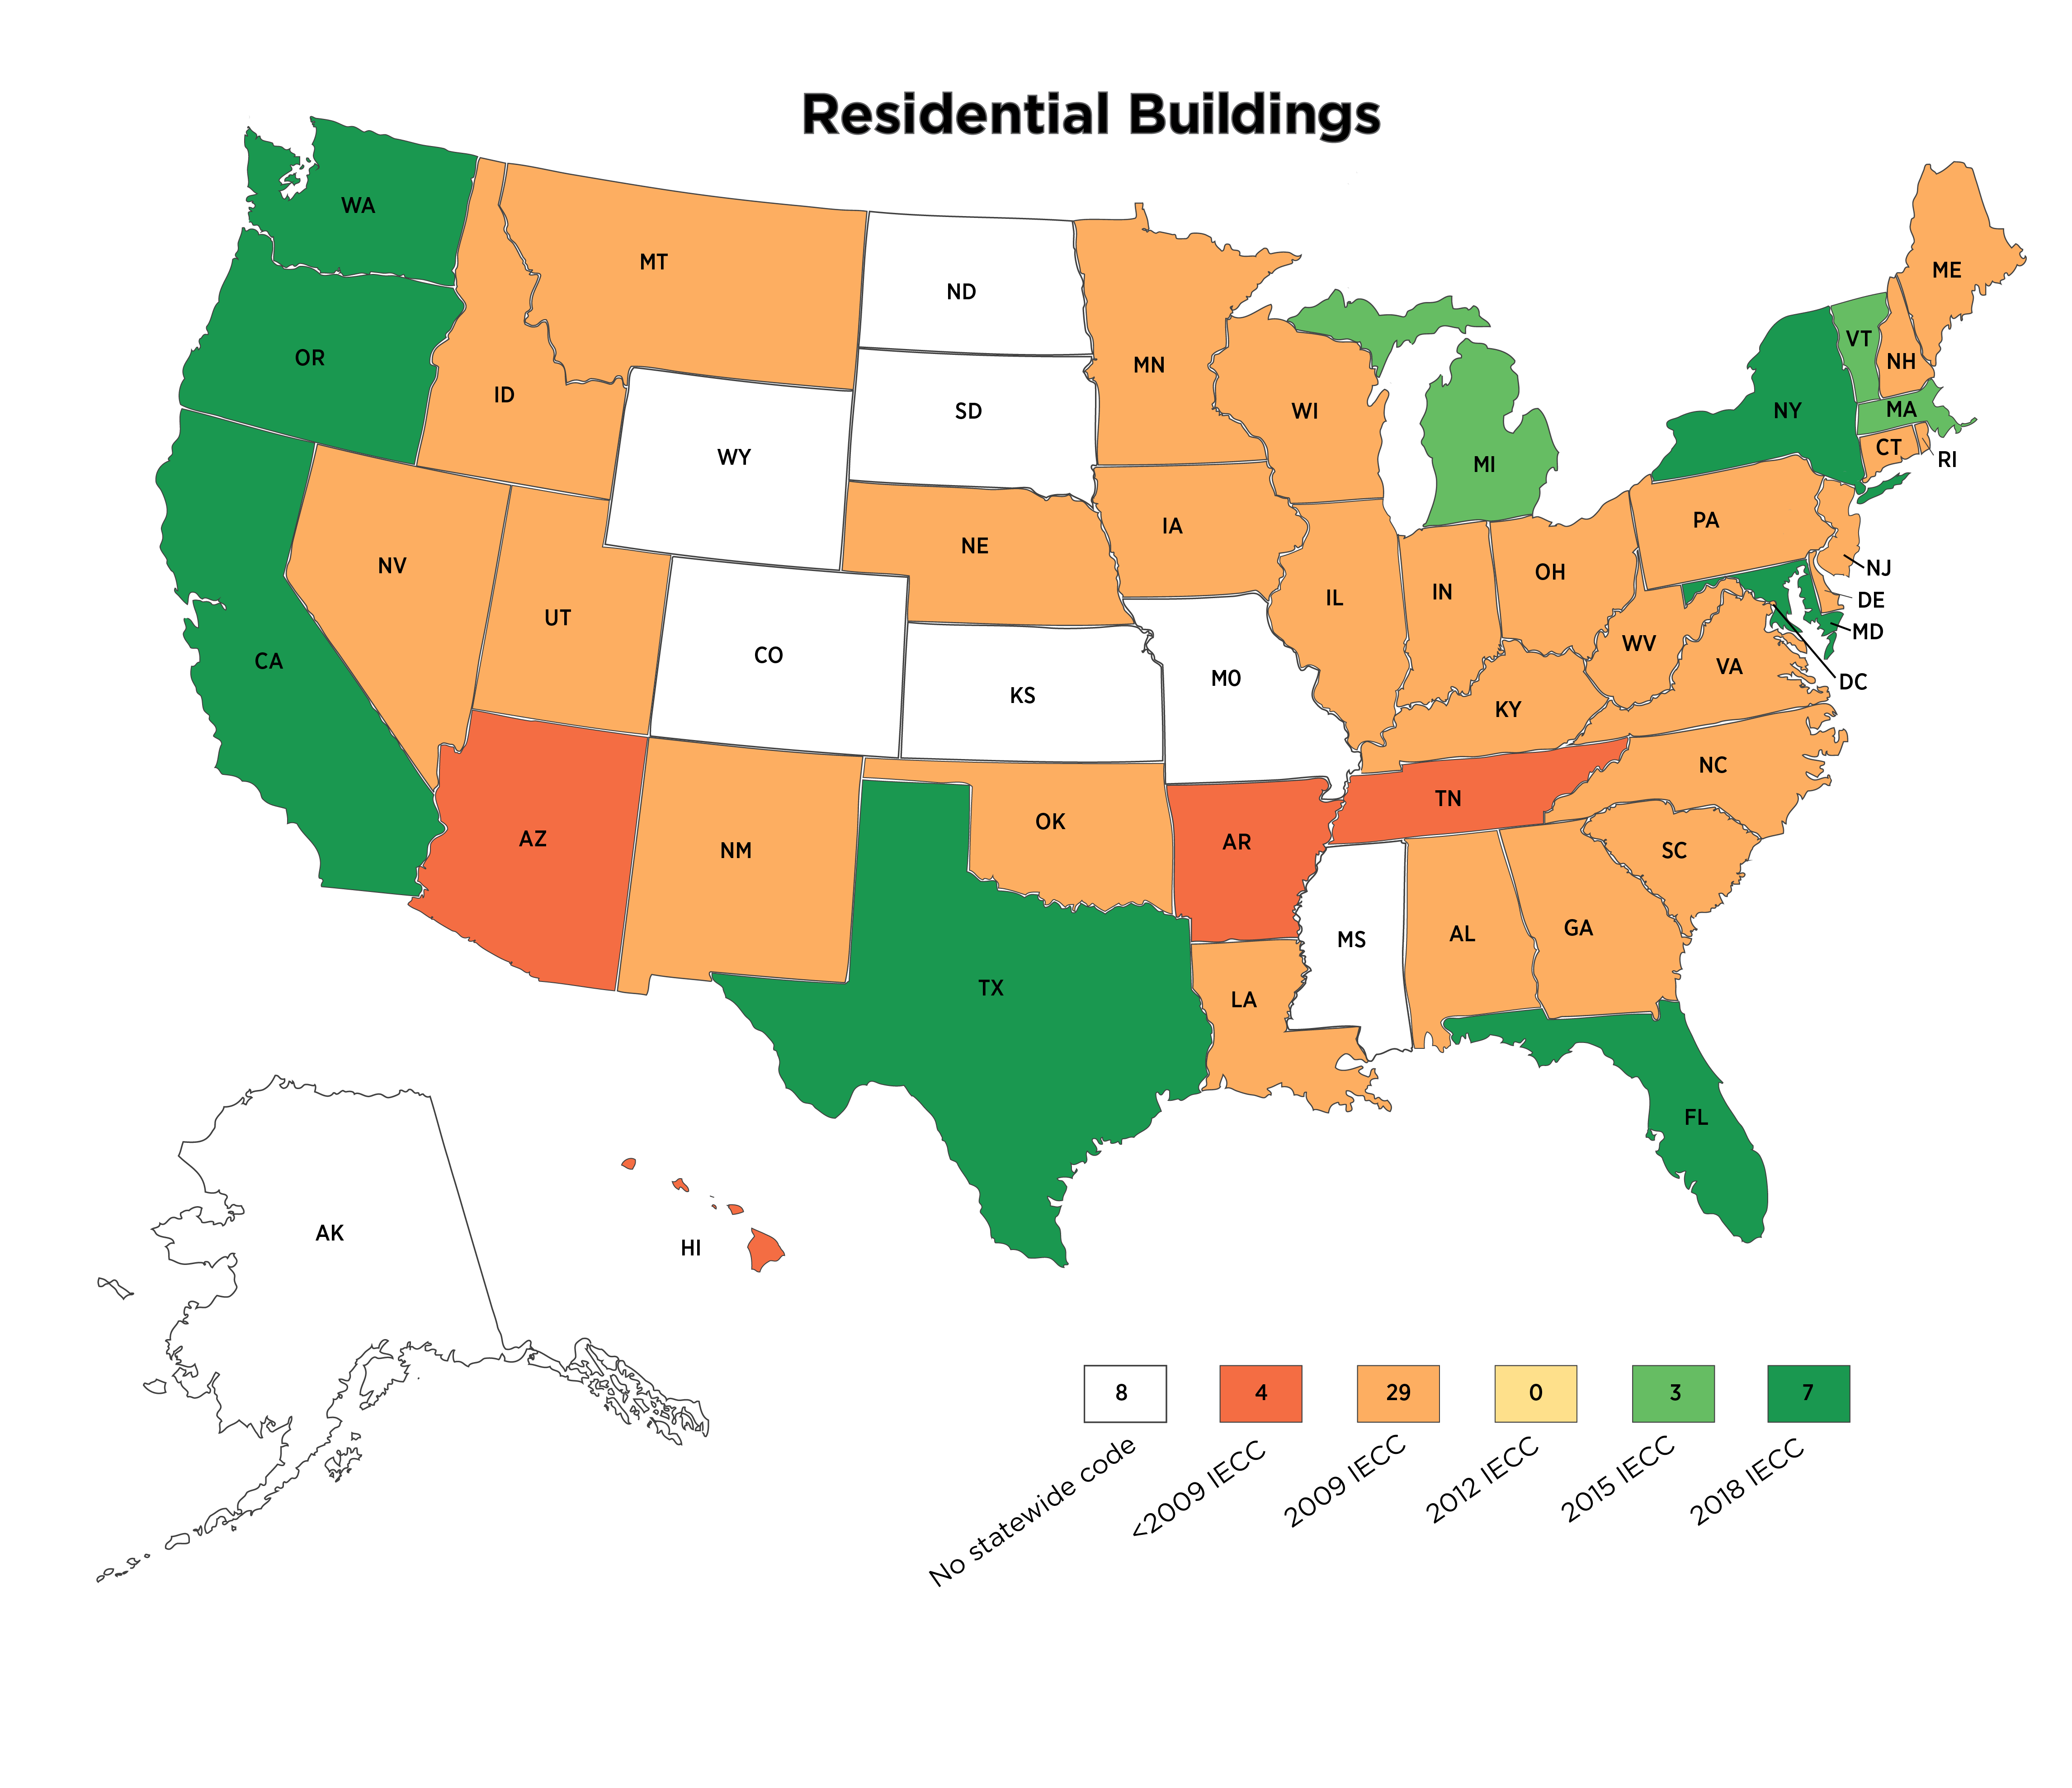 Energy Code Varies by State; How Progressive is Your Region?